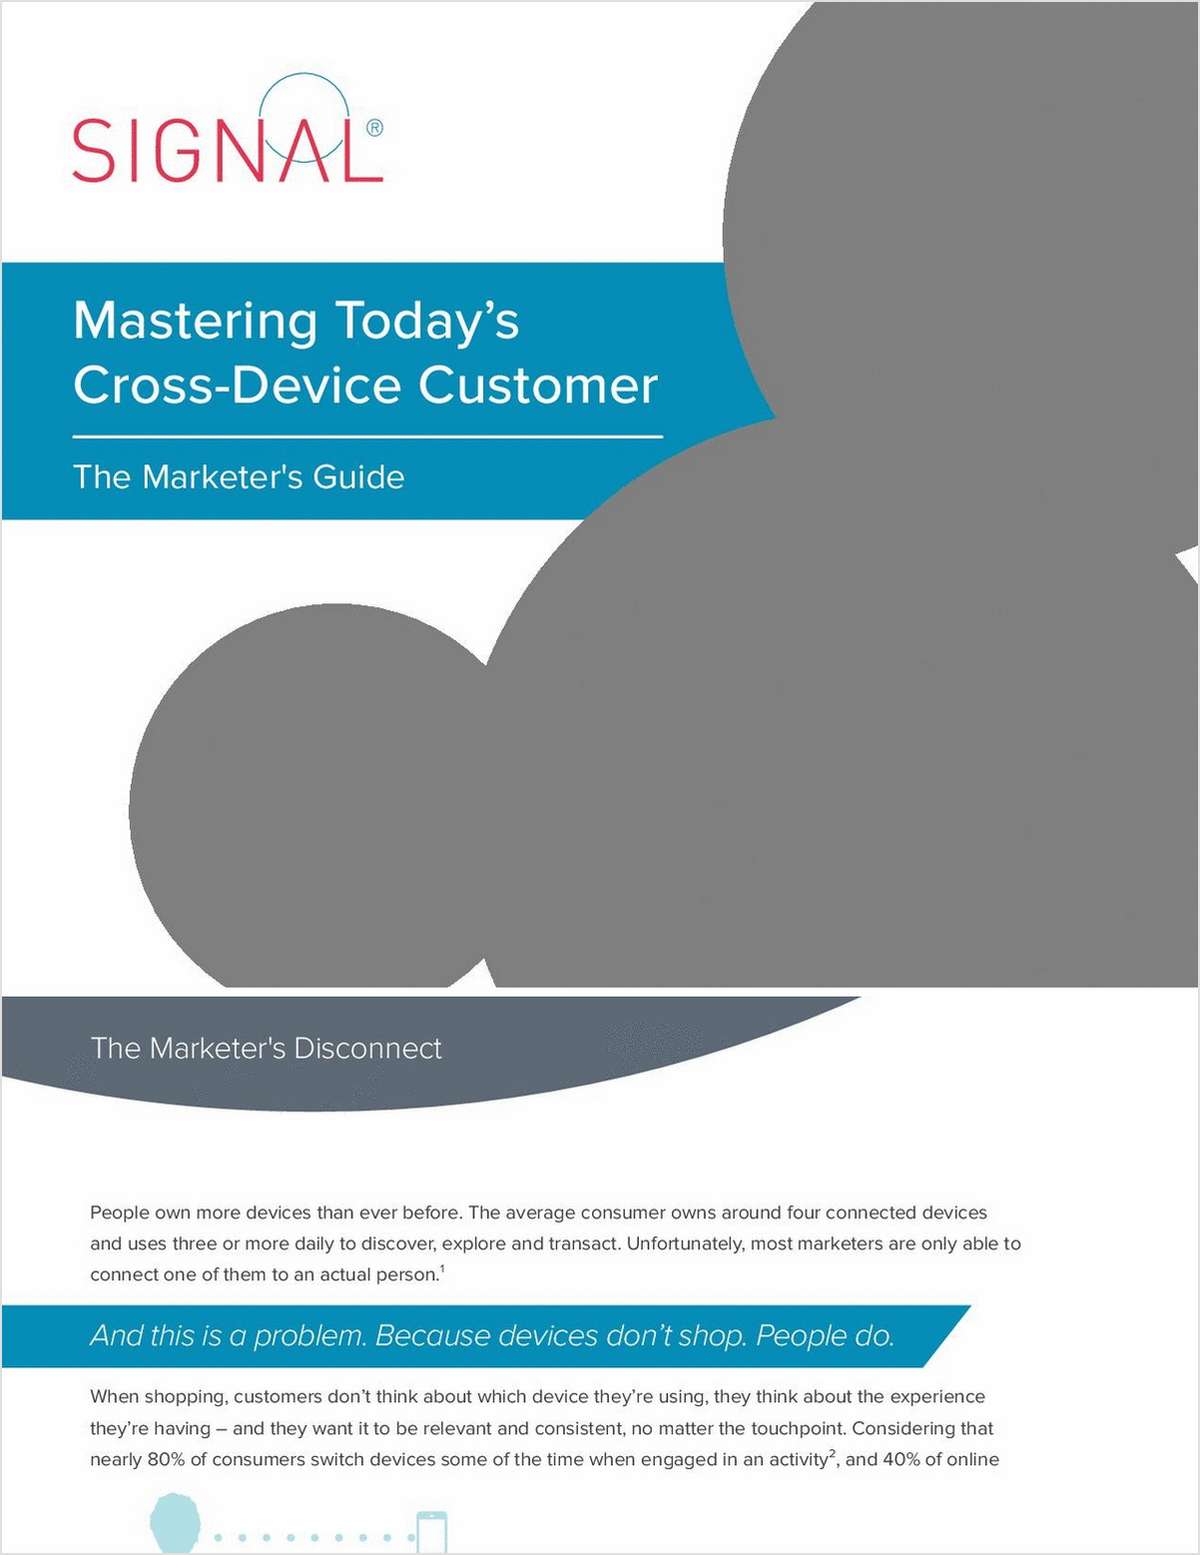 4 Rules For Developing Your Brand's Cross-Device Strategy